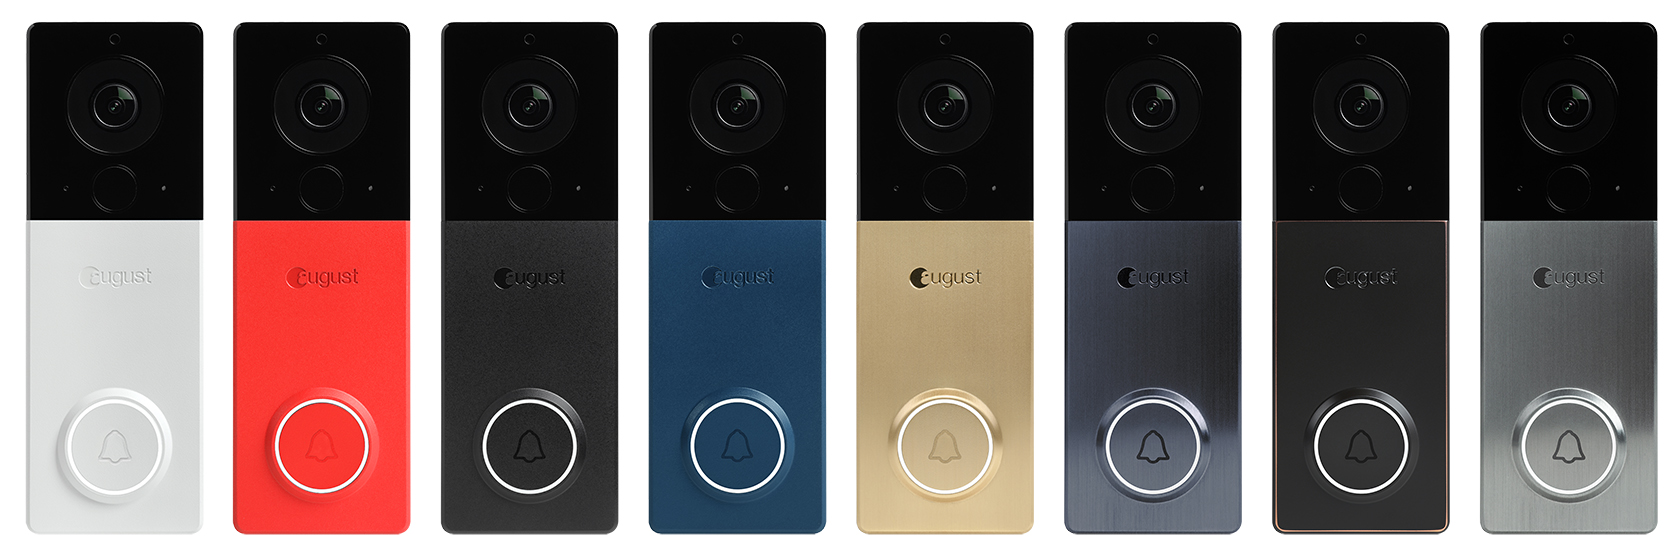 A promotional image of the eight different faceplate options available with the August View smart wireless video doorbell.